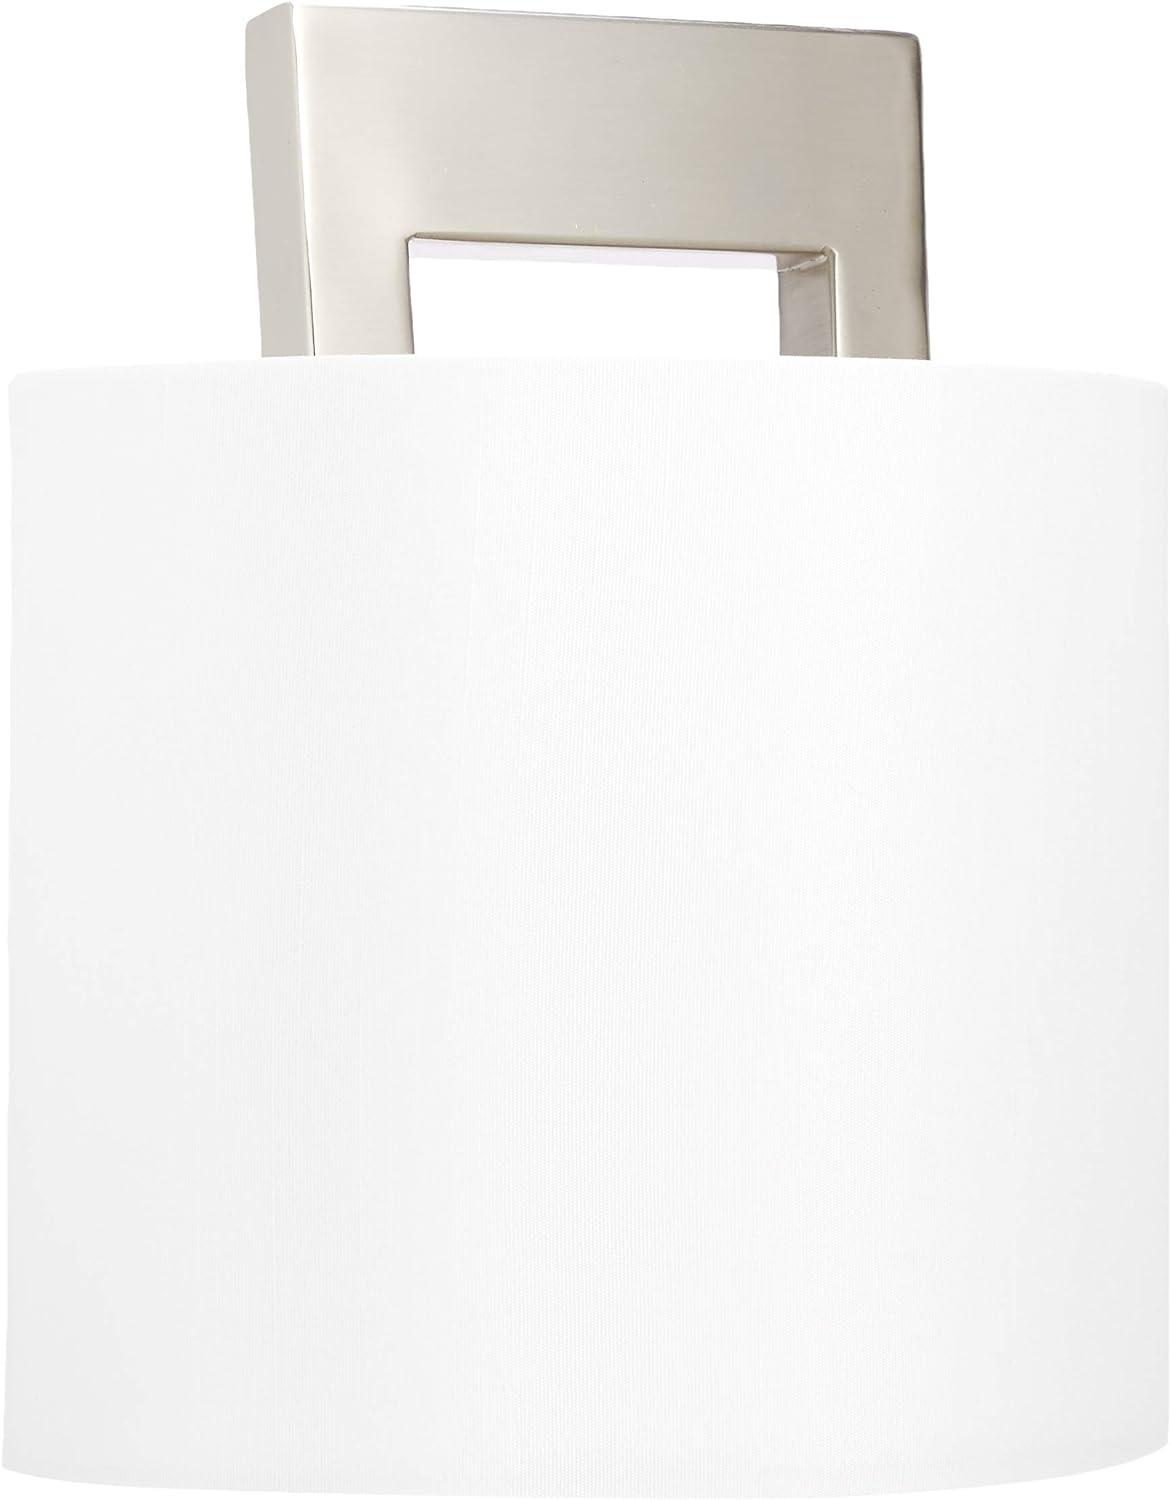 Elegant Brushed Nickel 1-Light Wall Sconce with Off-White Shade